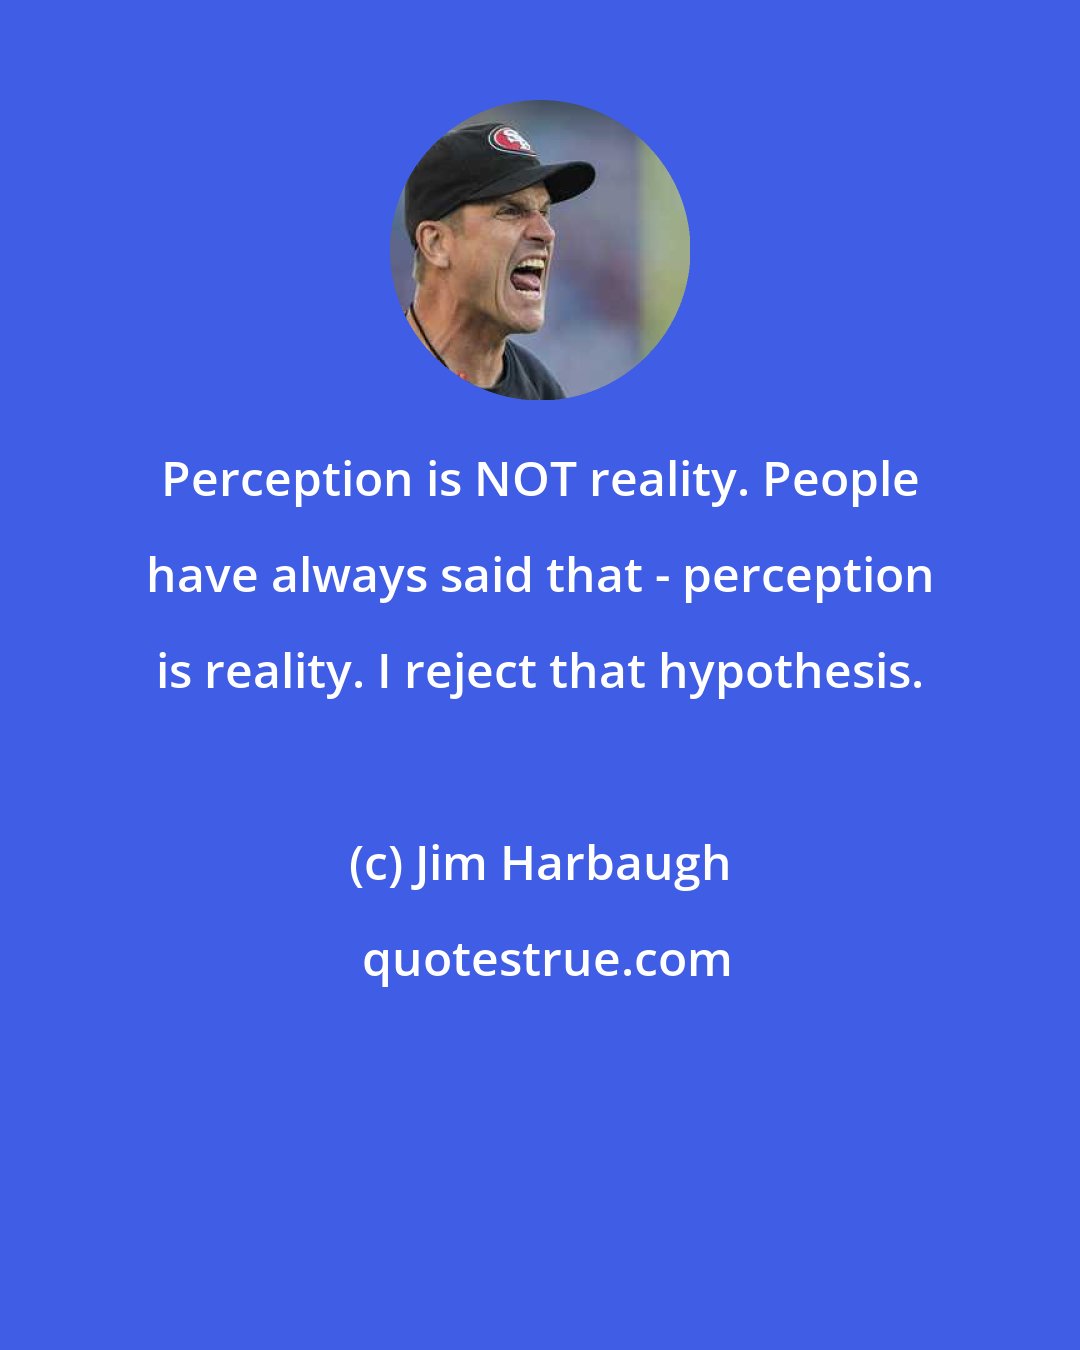 Jim Harbaugh: Perception is NOT reality. People have always said that - perception is reality. I reject that hypothesis.